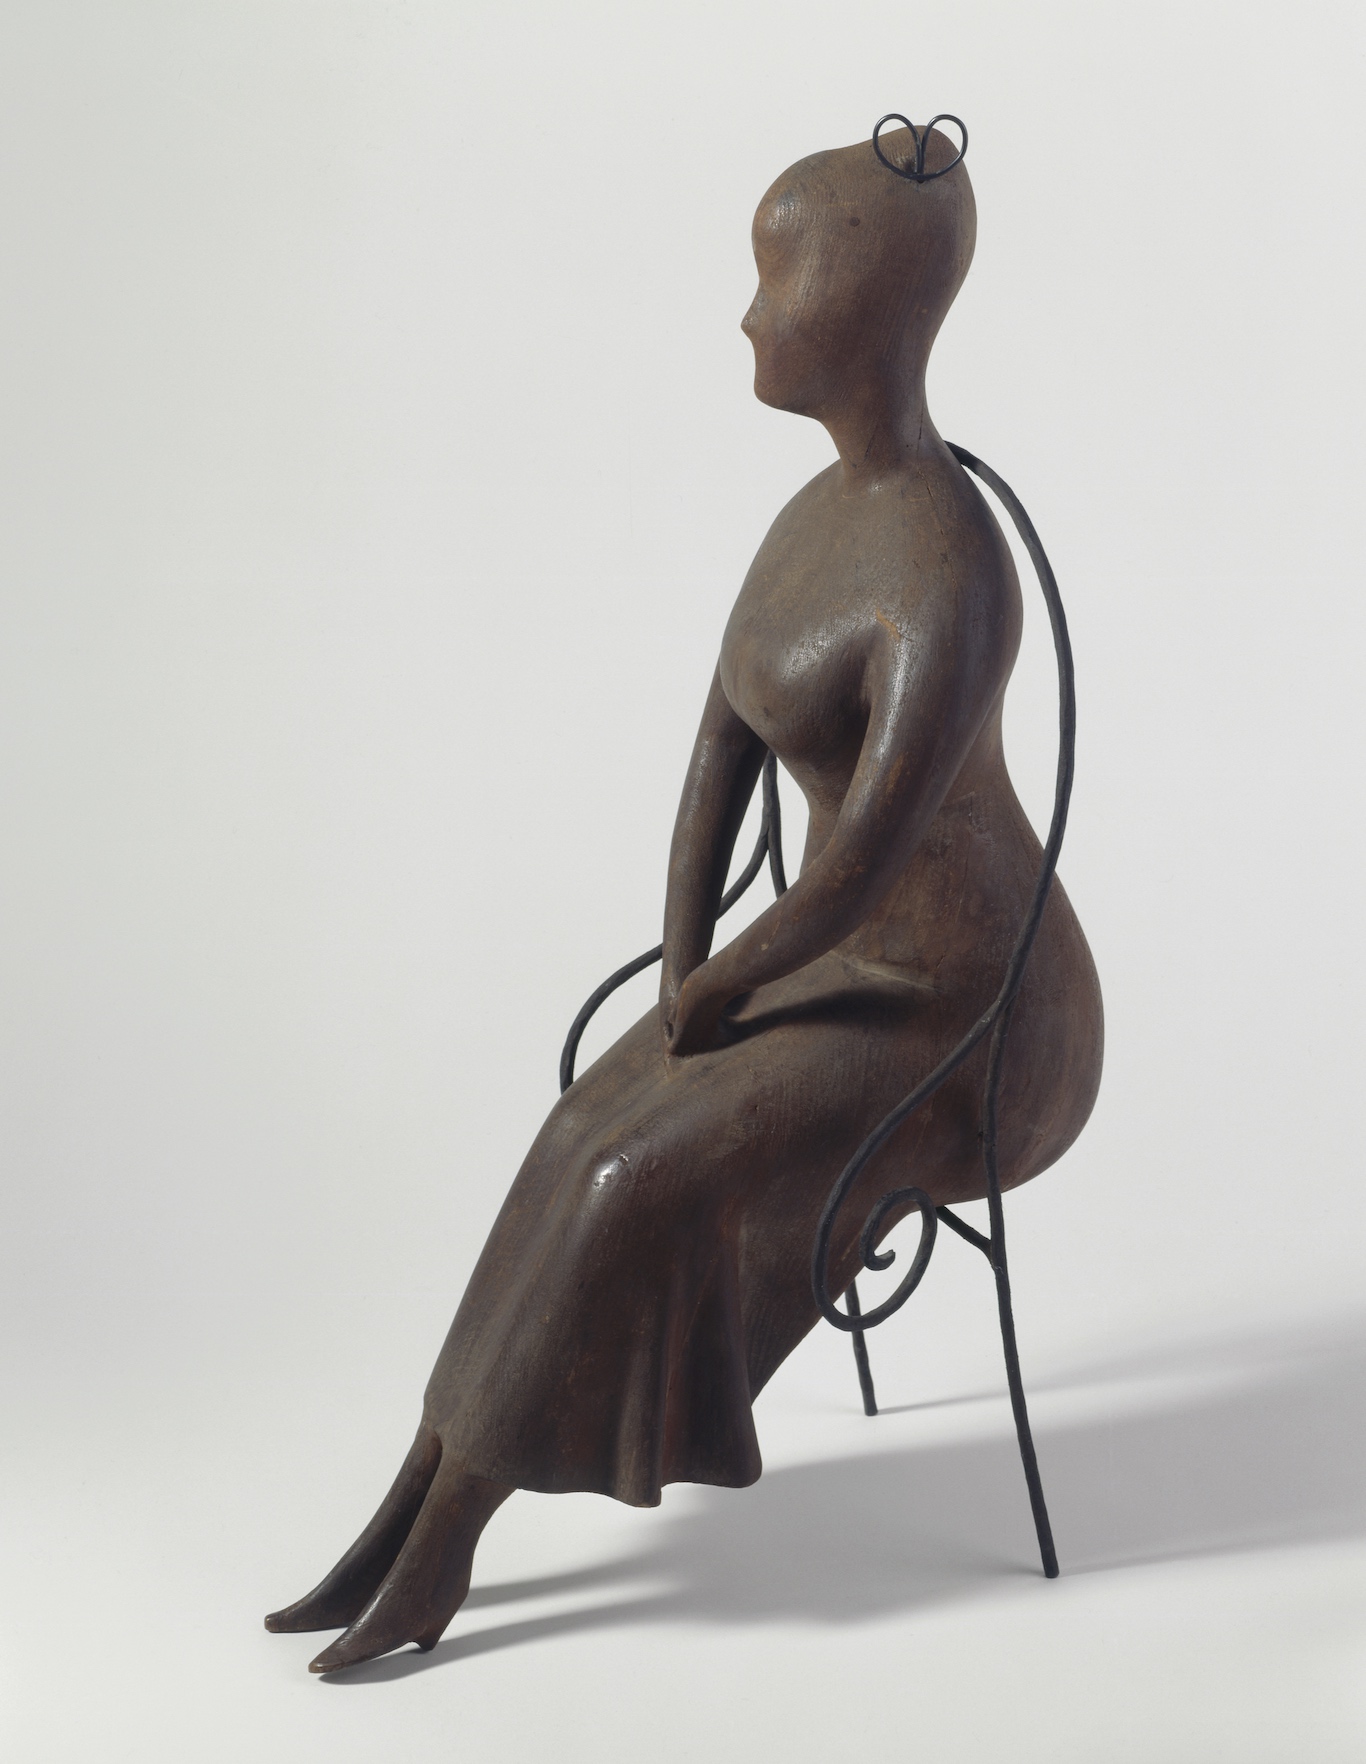 Elie Nadelman, Seated Woman, 1919-25. Cherry wood and iron. Addison Gallery of American Art, Museum purchase Artwork © Estate of Elie Nadelman; photograph, Greg Heins.